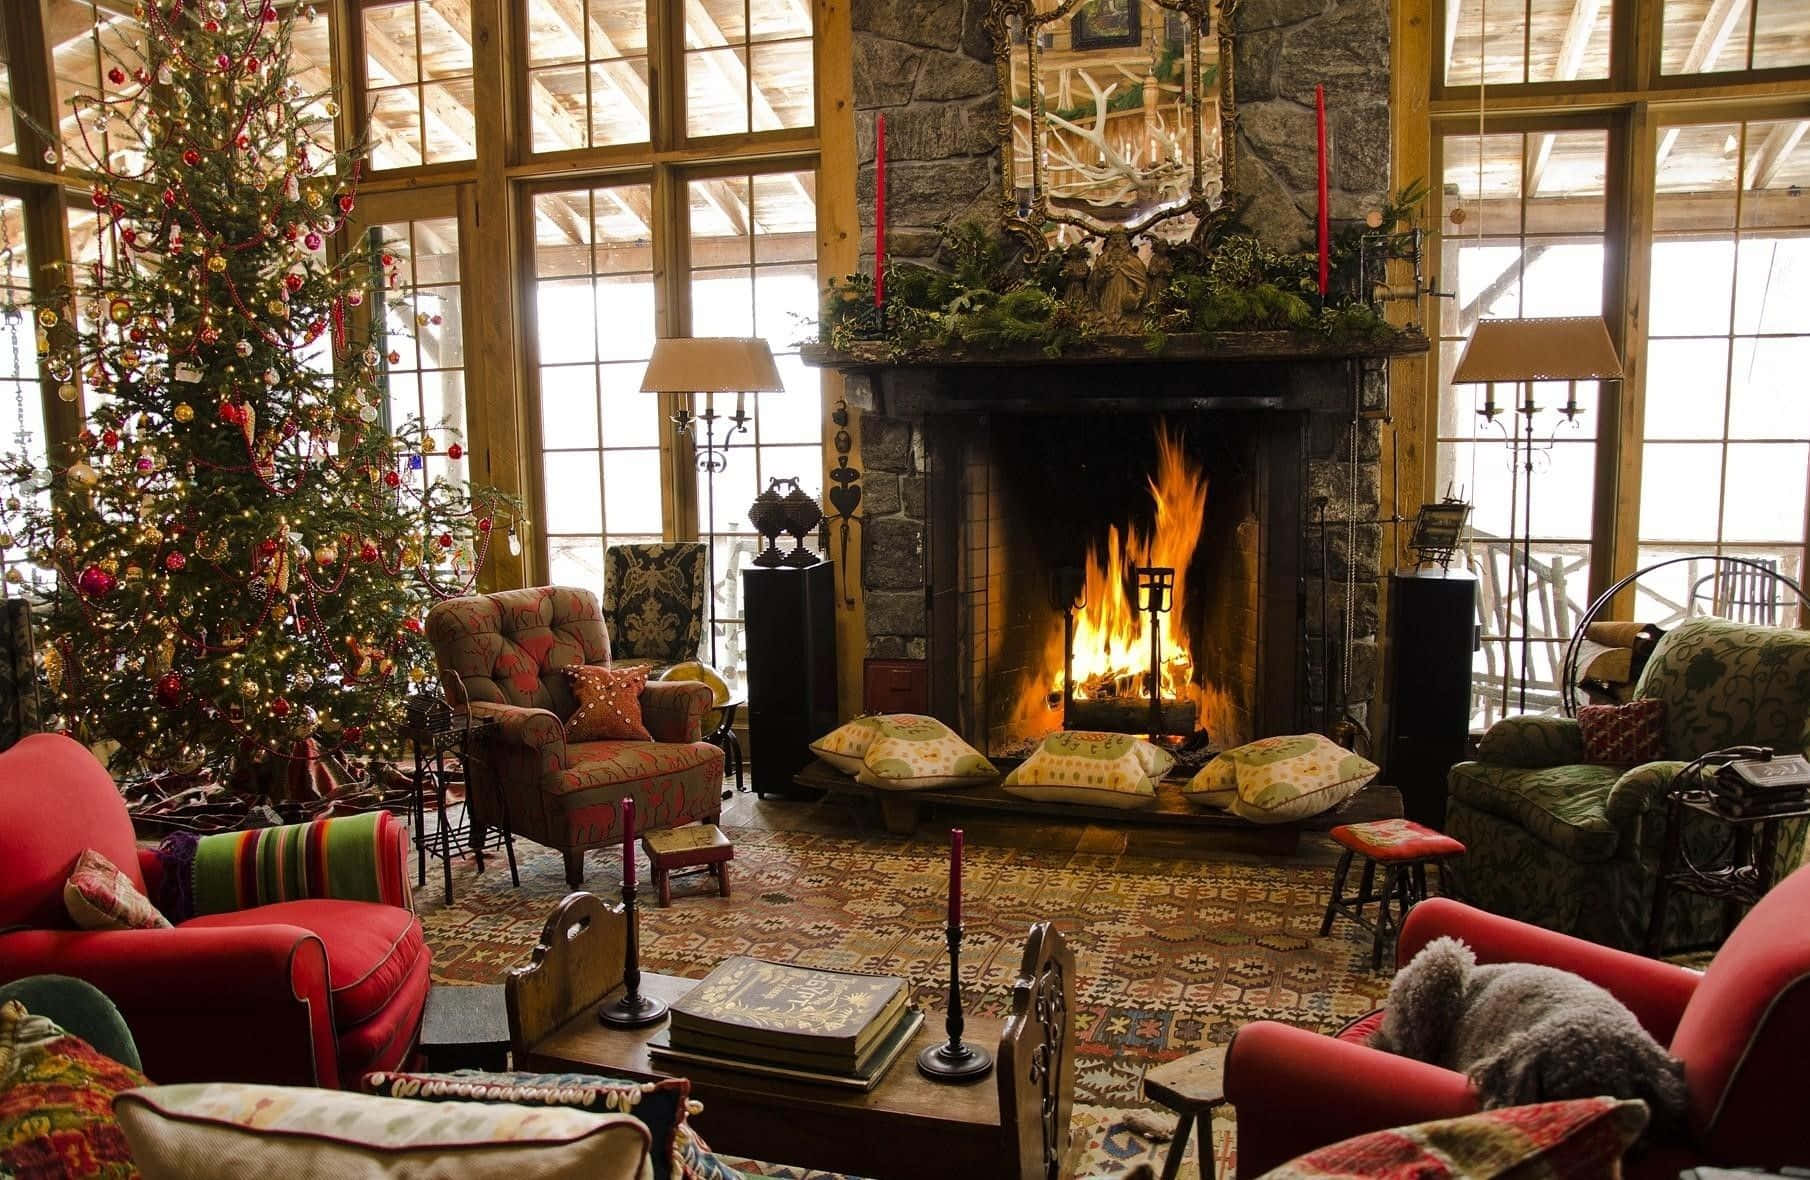 Christmas Fireplace With Antique Interior Background